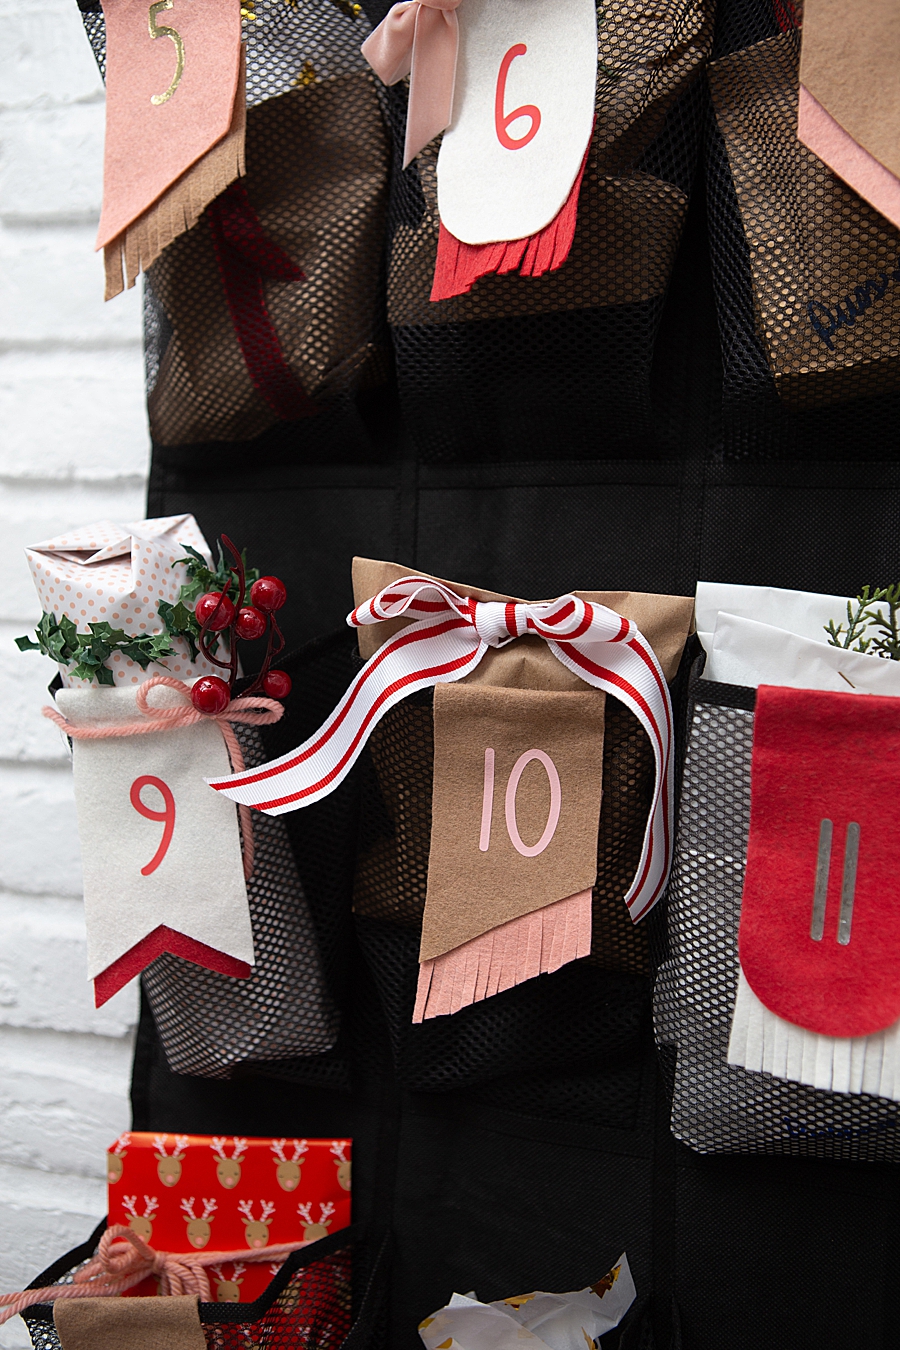 A shoe organizer is the best advent calendar holder for large families!